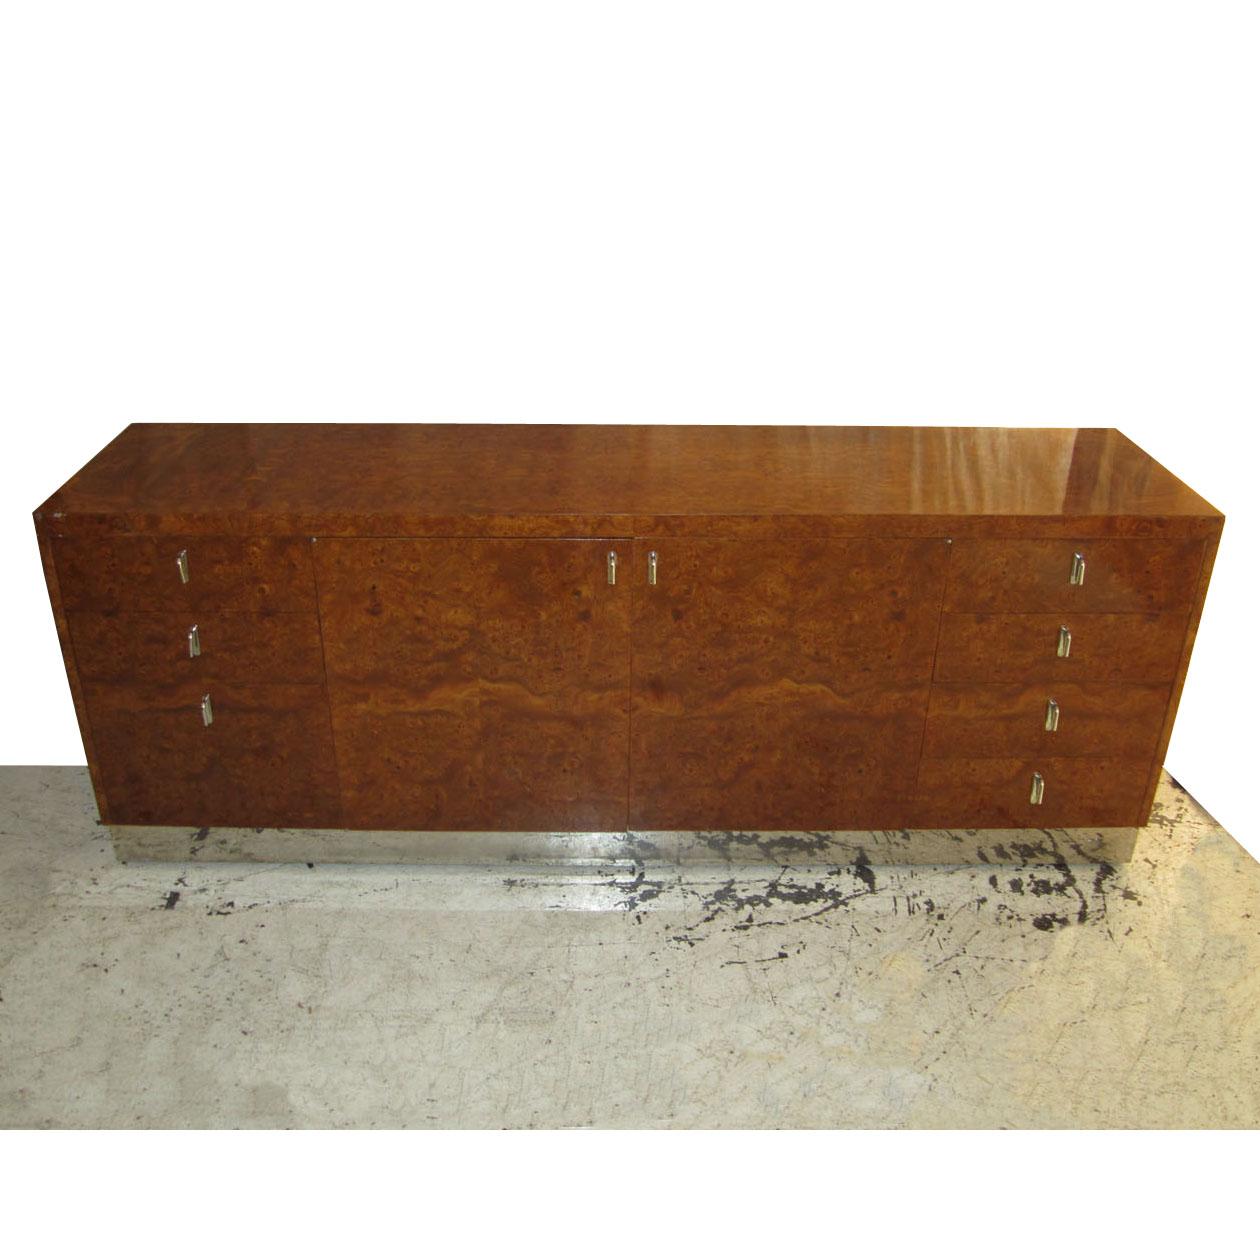 Jim and his brother Bob Eppinger started a manufacturing company, Eppinger Furniture, Inc., manufacturing custom quality furniture for Fortune 500 companies’ executive offices and conference rooms.

This is an Executive Credenza manufactured by